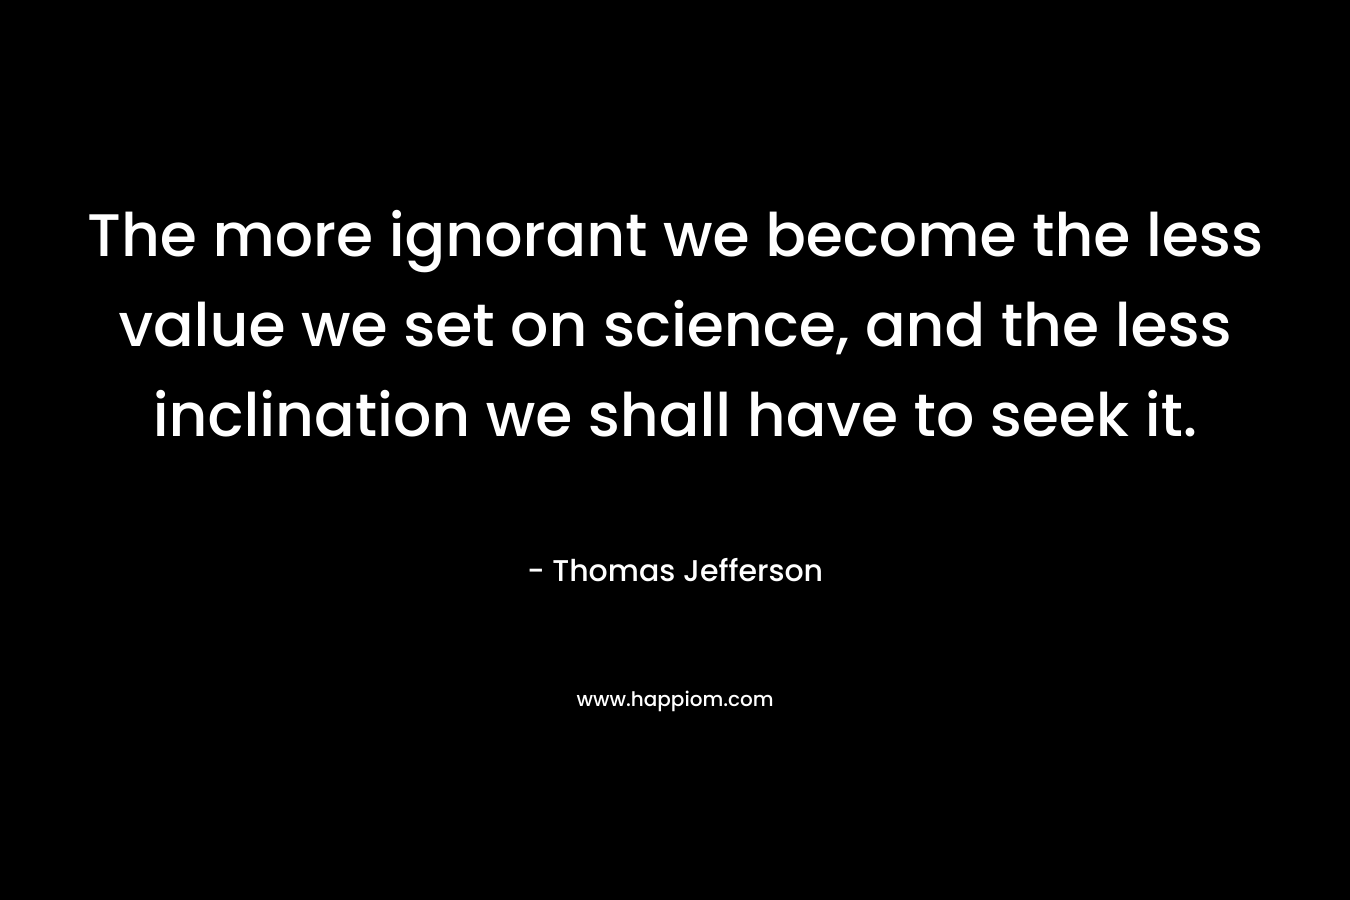 The more ignorant we become the less value we set on science, and the less inclination we shall have to seek it.